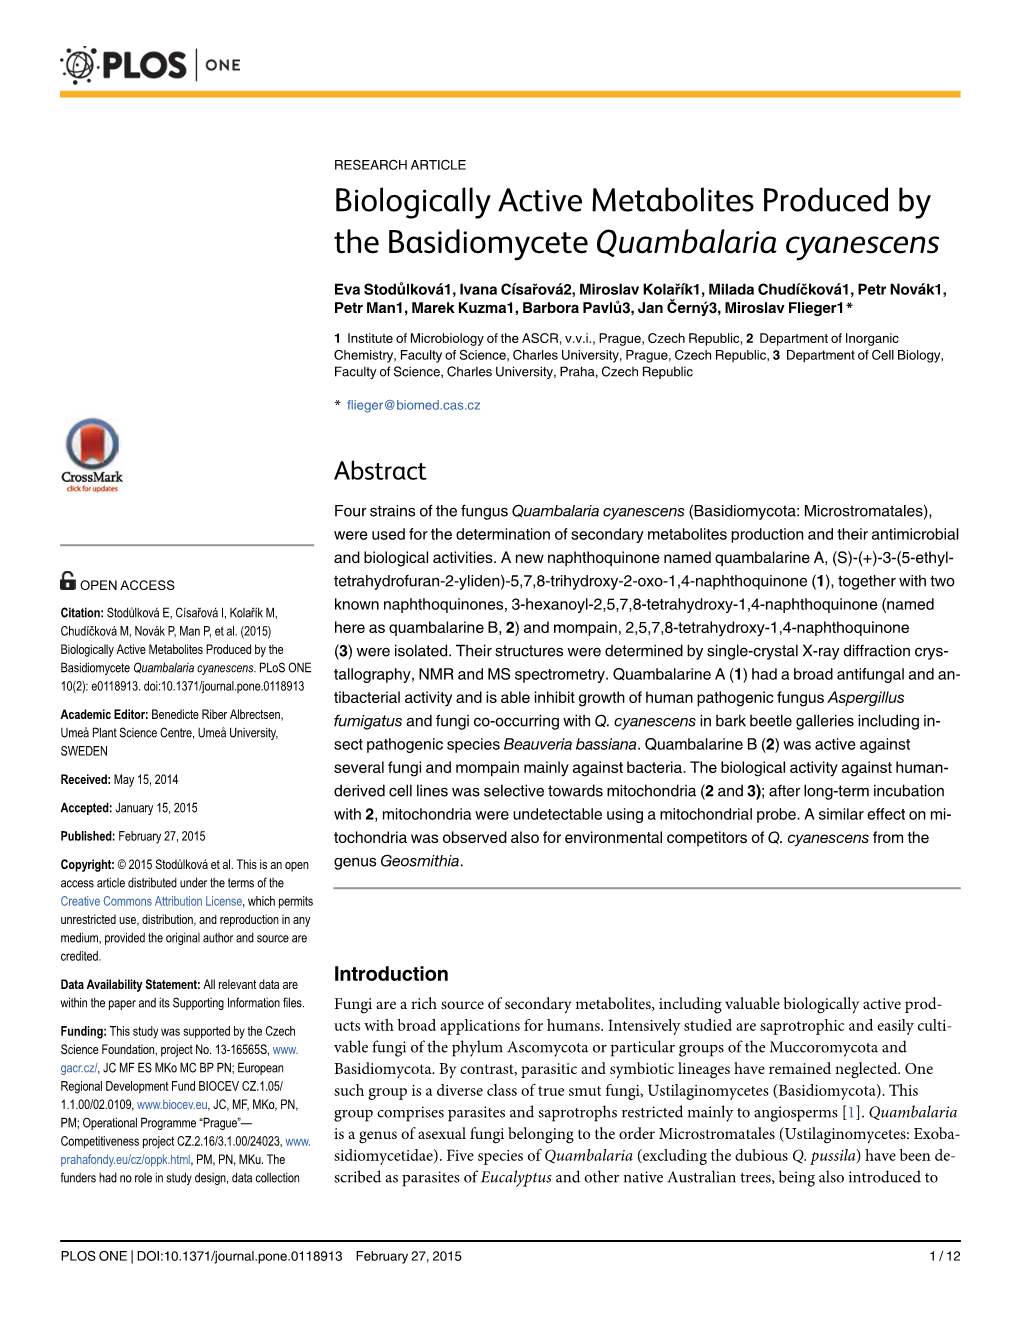 Biologically Active Metabolites Produced by the Basidiomycete Quambalaria Cyanescens